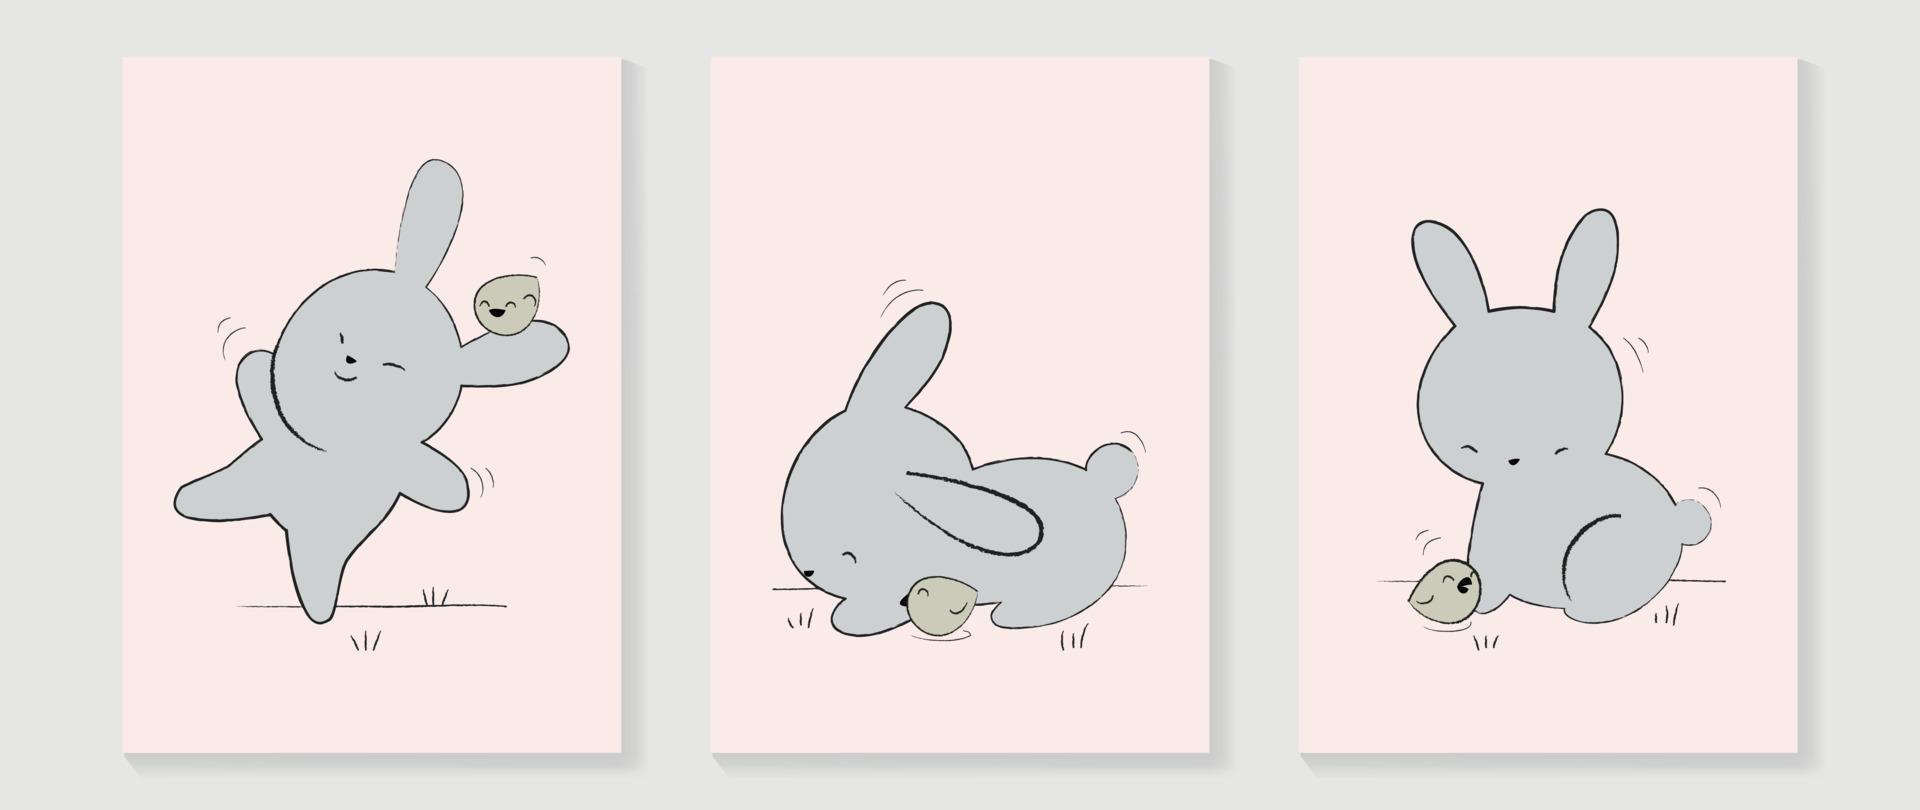 Cute comic easter wall art vector set. Collection of adorable hand drawn playful rabbit and baby chick. Design illustration for nursery wall art in doodle style, baby, kids poster, card, invitation.